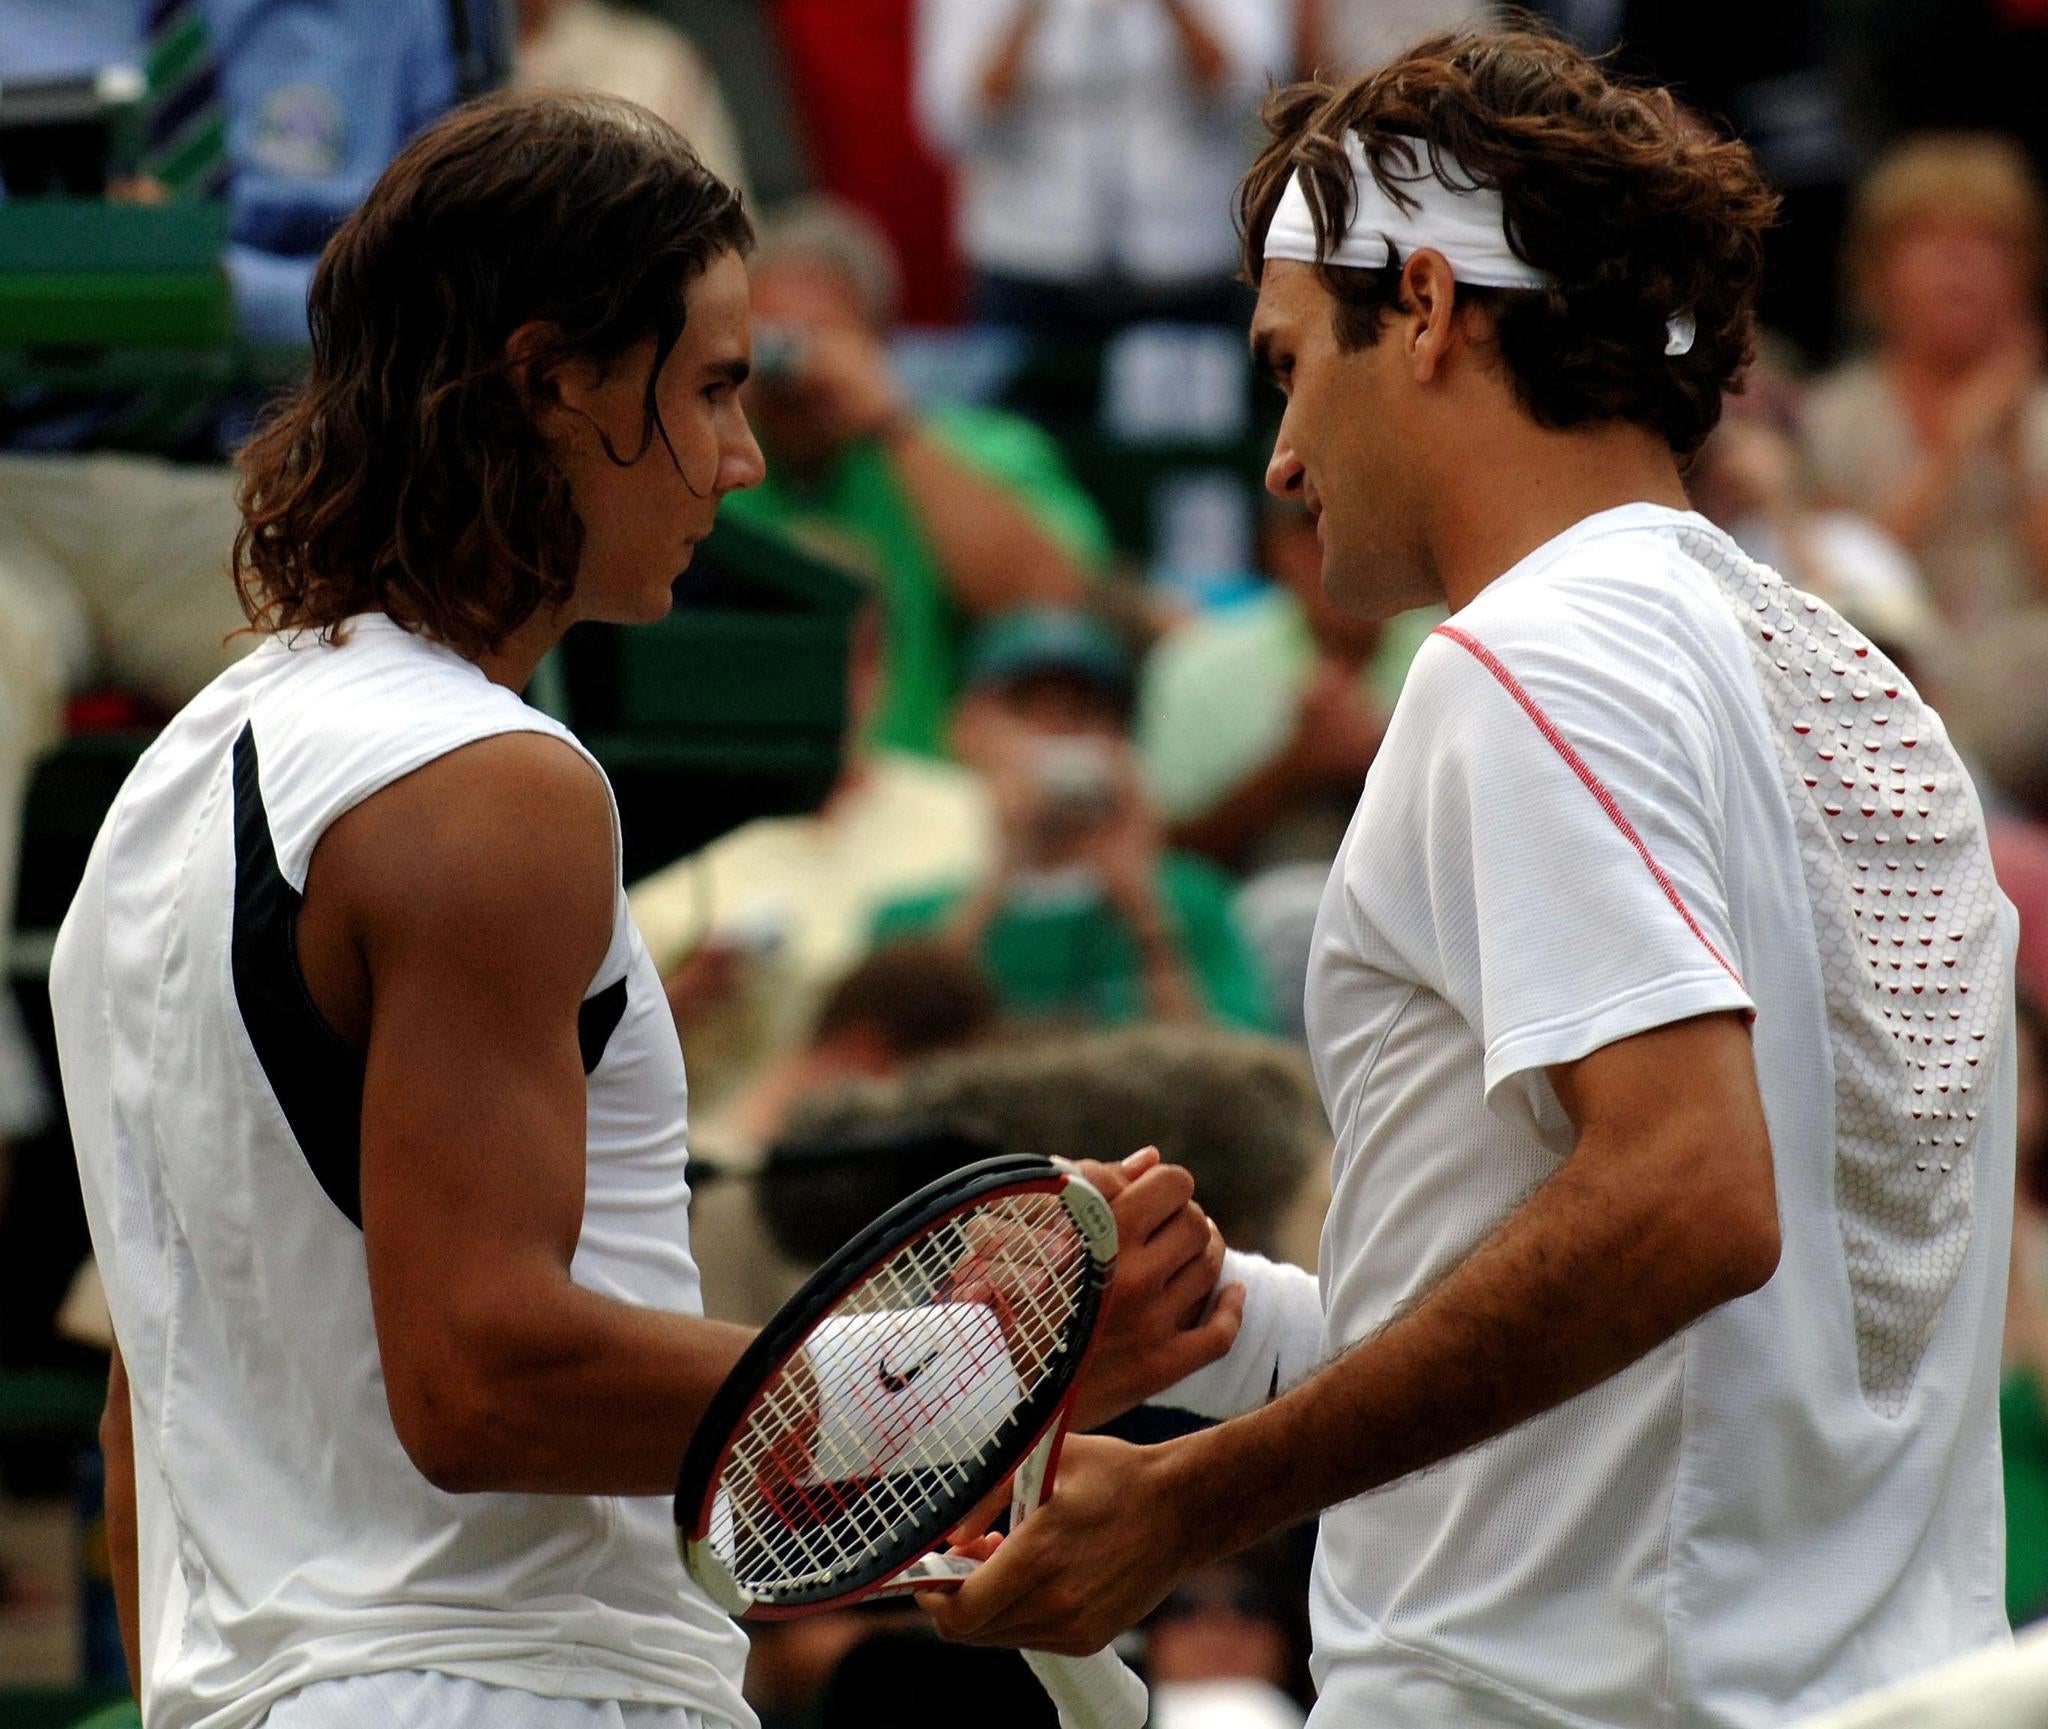 Federer shakes hands with Nadal after seeing off the Spaniard in four sets to secure a fourth straight Wimbledon title (Fiona Hanson/PA)